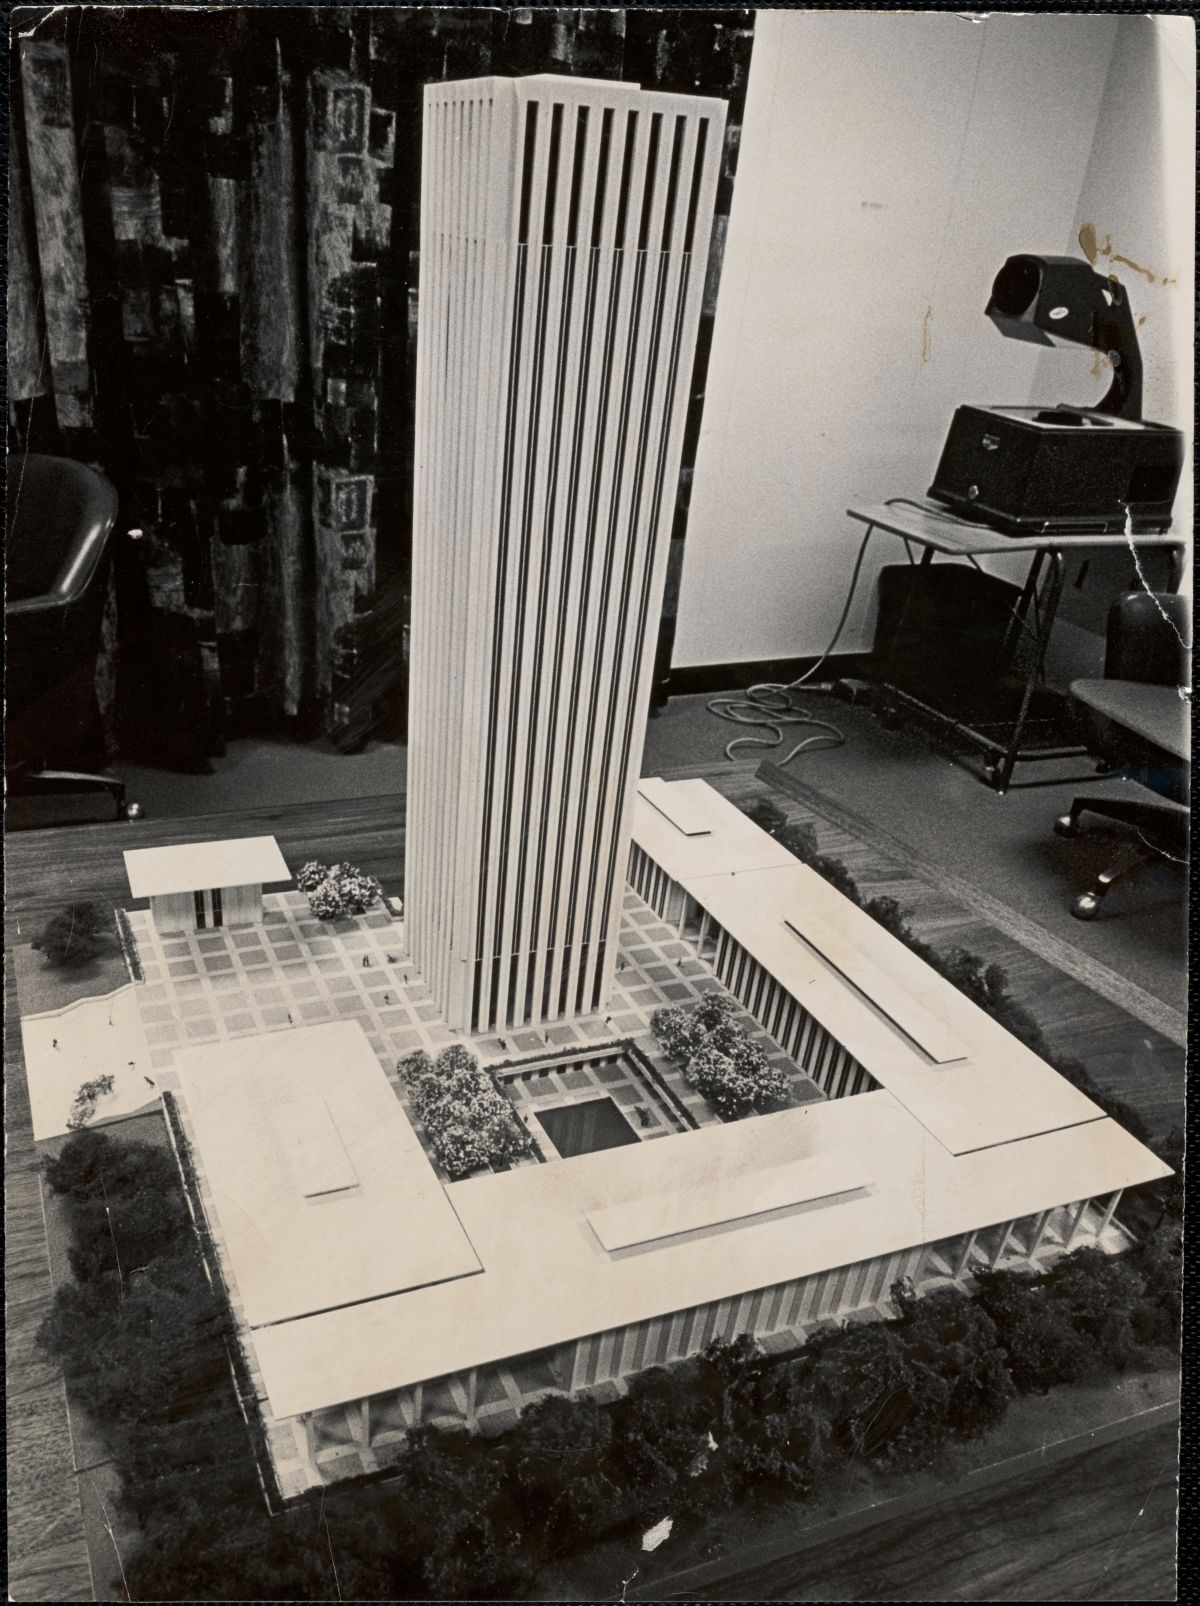 [A model of the NASA complex that is to be build in the Kendall Sq. section of Cambridge](https://www.digitalcommonwealth.org/search/commonwealth:wd377626k), 1966